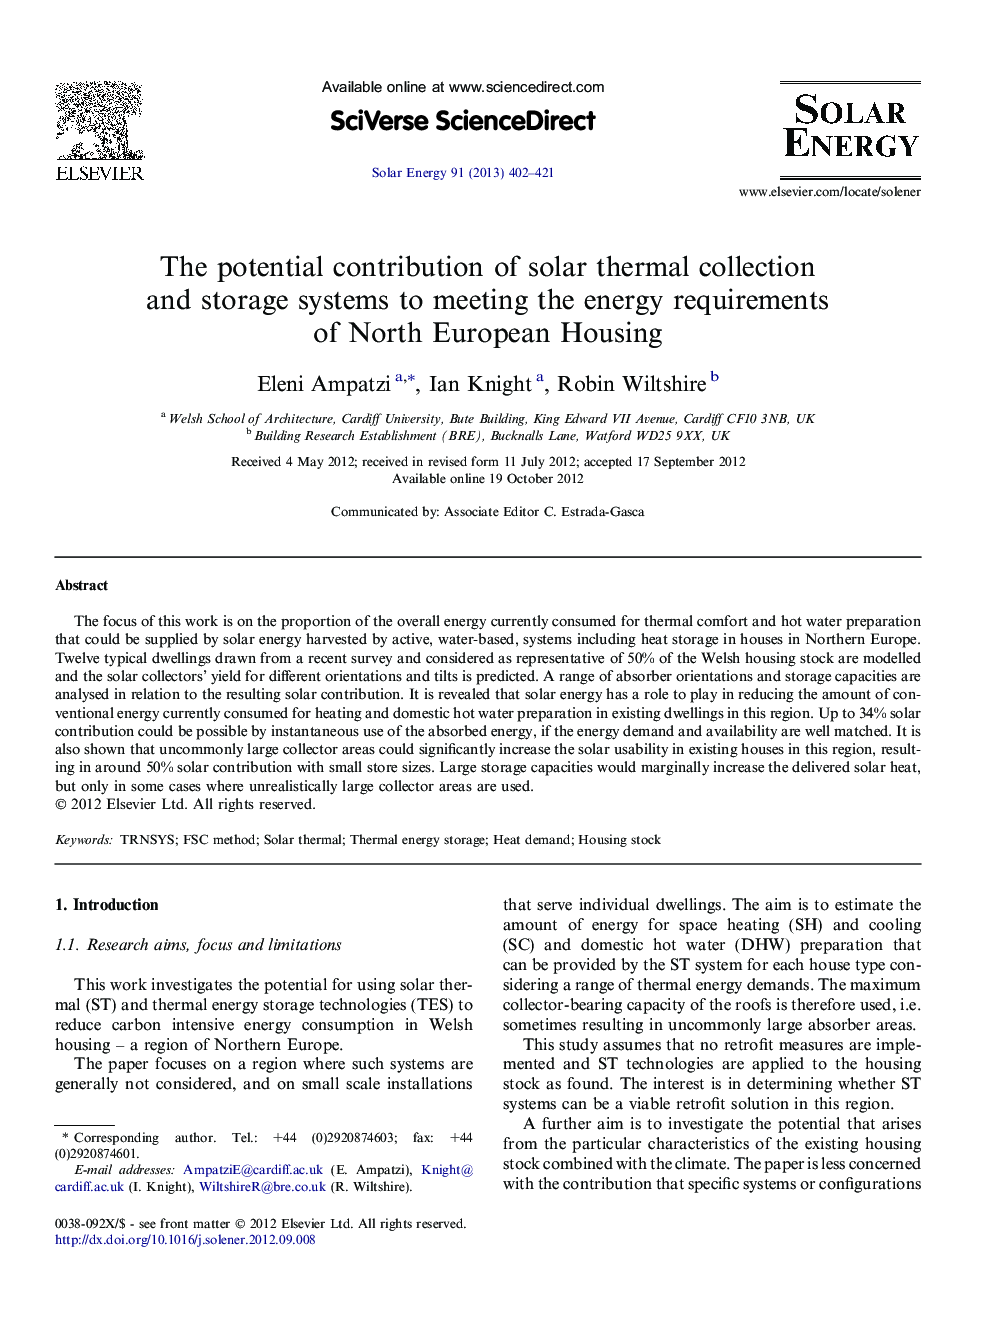 The potential contribution of solar thermal collection and storage systems to meeting the energy requirements of North European Housing